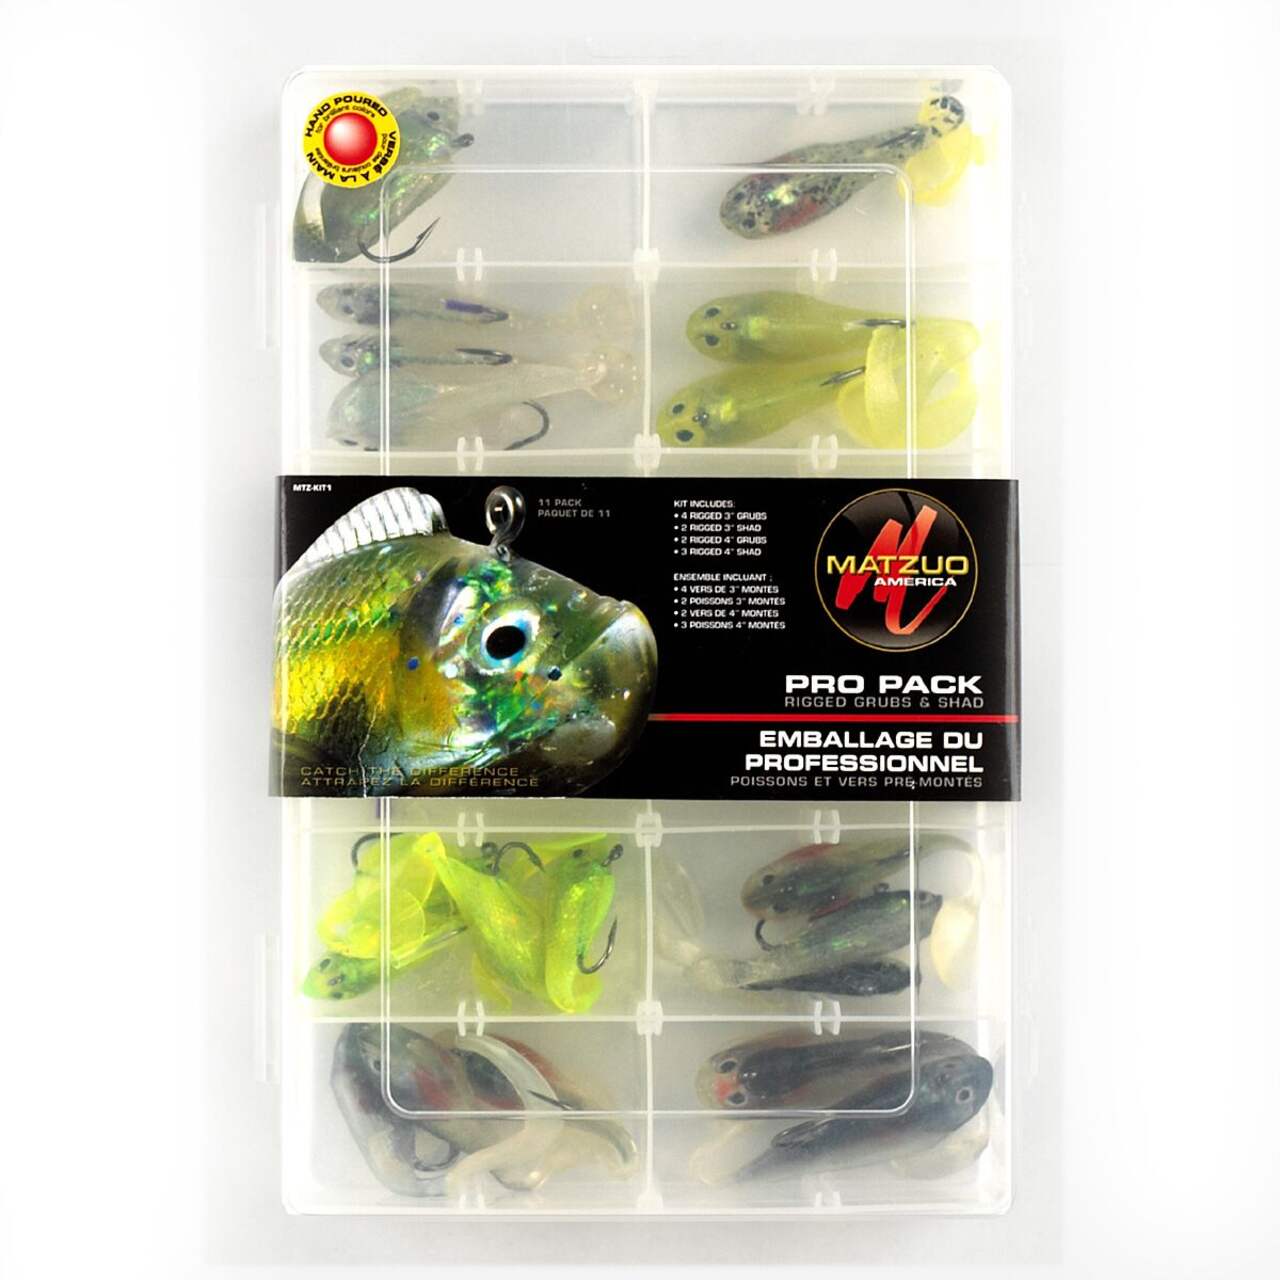 https://media-www.canadiantire.ca/product/playing/fishing/fishing-lures/0787933/matzuo-rigged-bait-kit-19-piece-cb4a1330-b979-4eff-a688-b49cb59457a1-jpgrendition.jpg?imdensity=1&imwidth=640&impolicy=mZoom